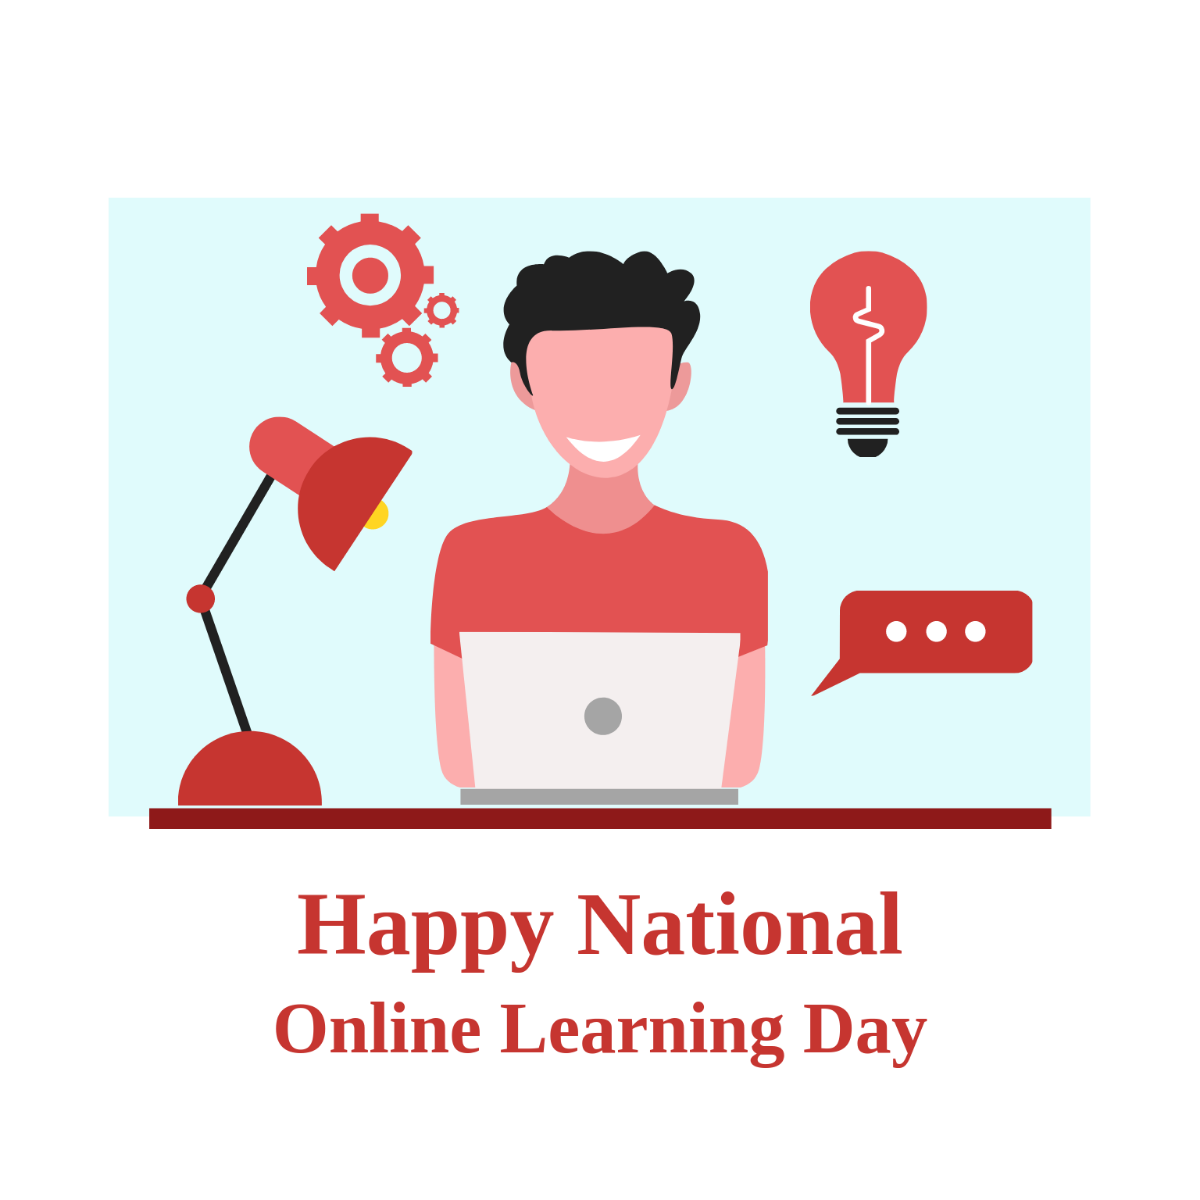 Happy National Online Learning Day Vector